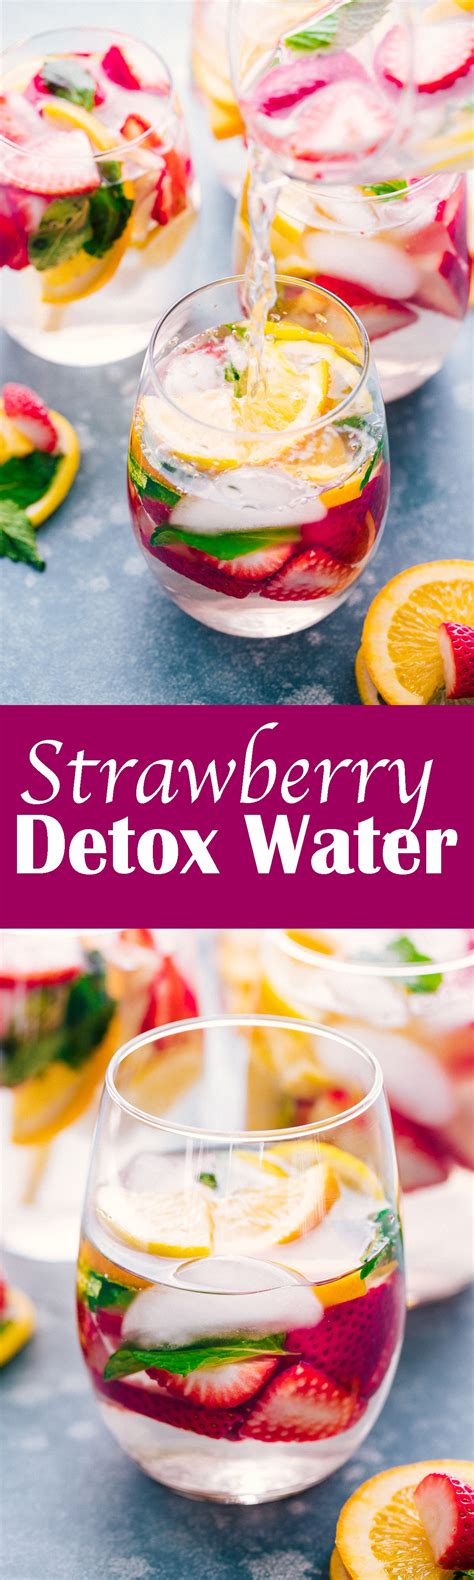 Strawberry Detox Water Is An Amazing Refreshing Drink That Will Ensure